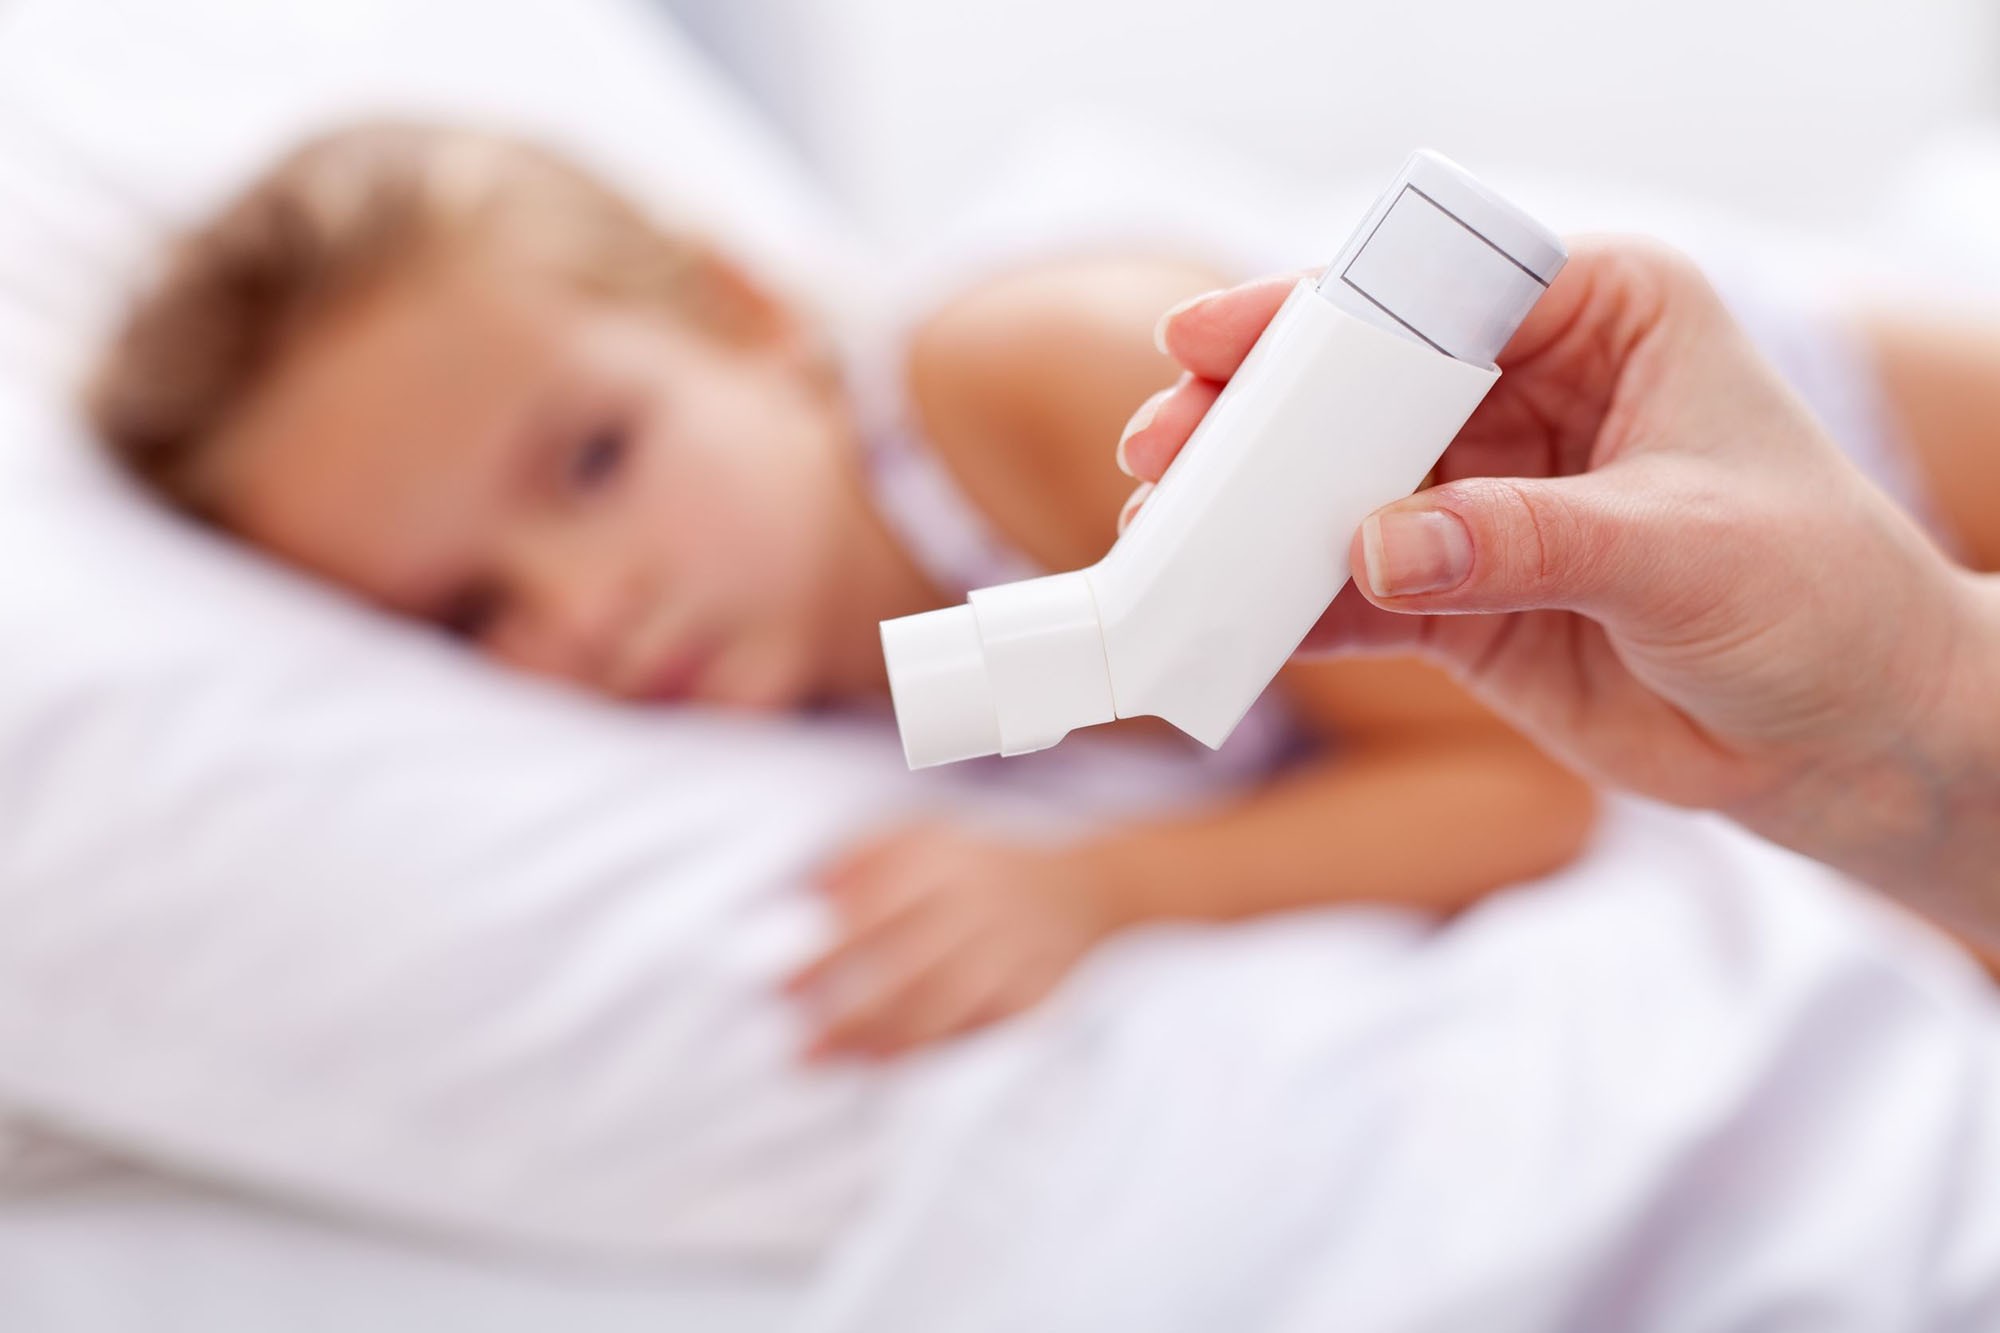 Step by step: How to manage acute asthma and wheezing in children in primary care